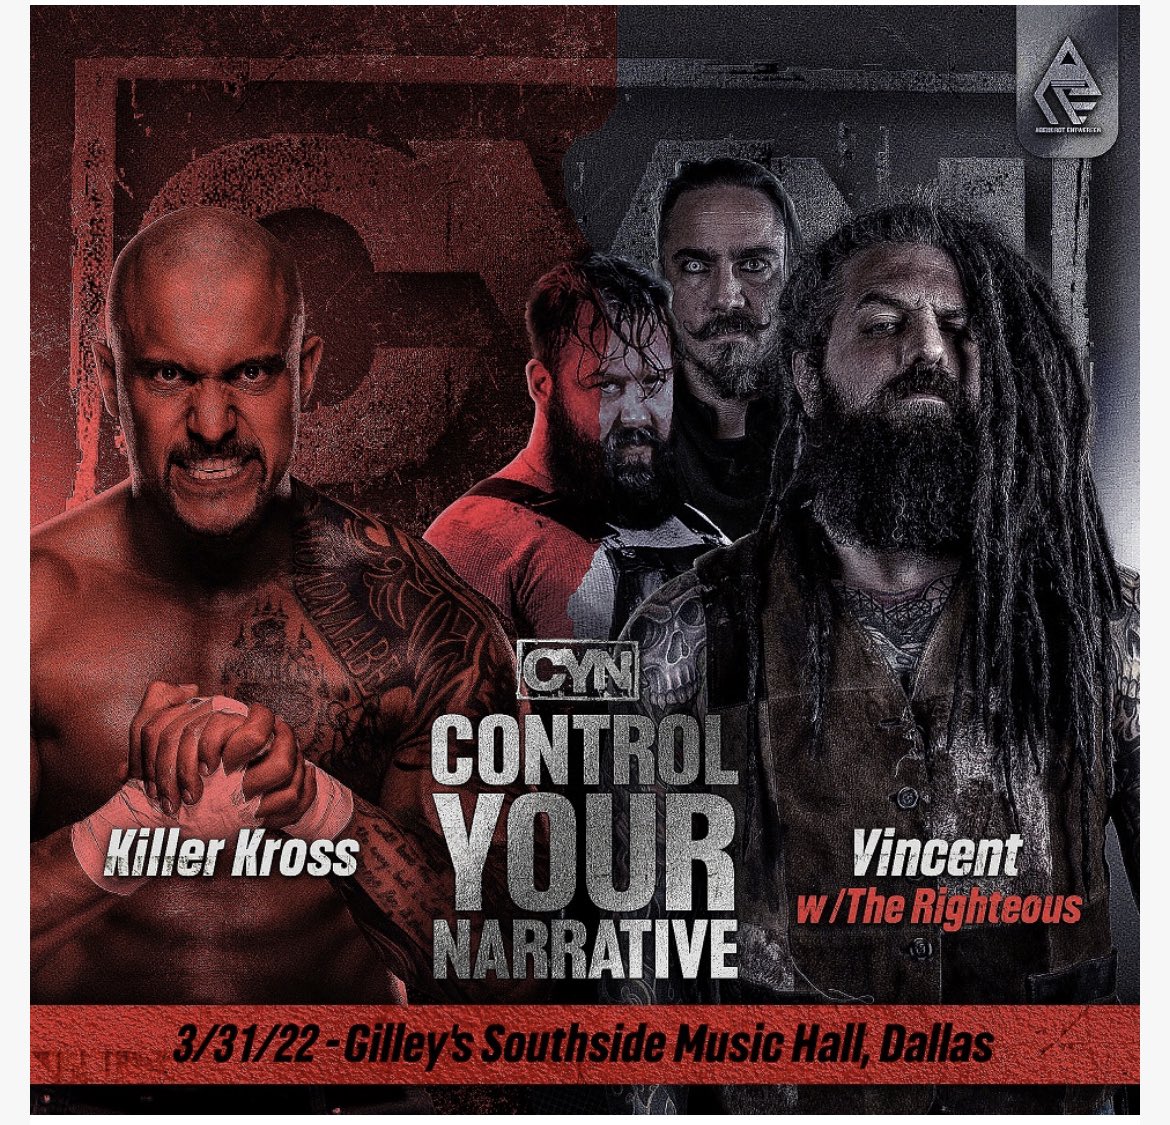 Check out this card!   @Adamscherr99 and @ErickRedBeard on opposing sides! @realKILLERkross vs @TheHorrorKingVM in what should be an amazing match!  I can dig that!  If you live in Texas.. get your tickets now and if not check it out on @ProWTV !! #controlyournarrative